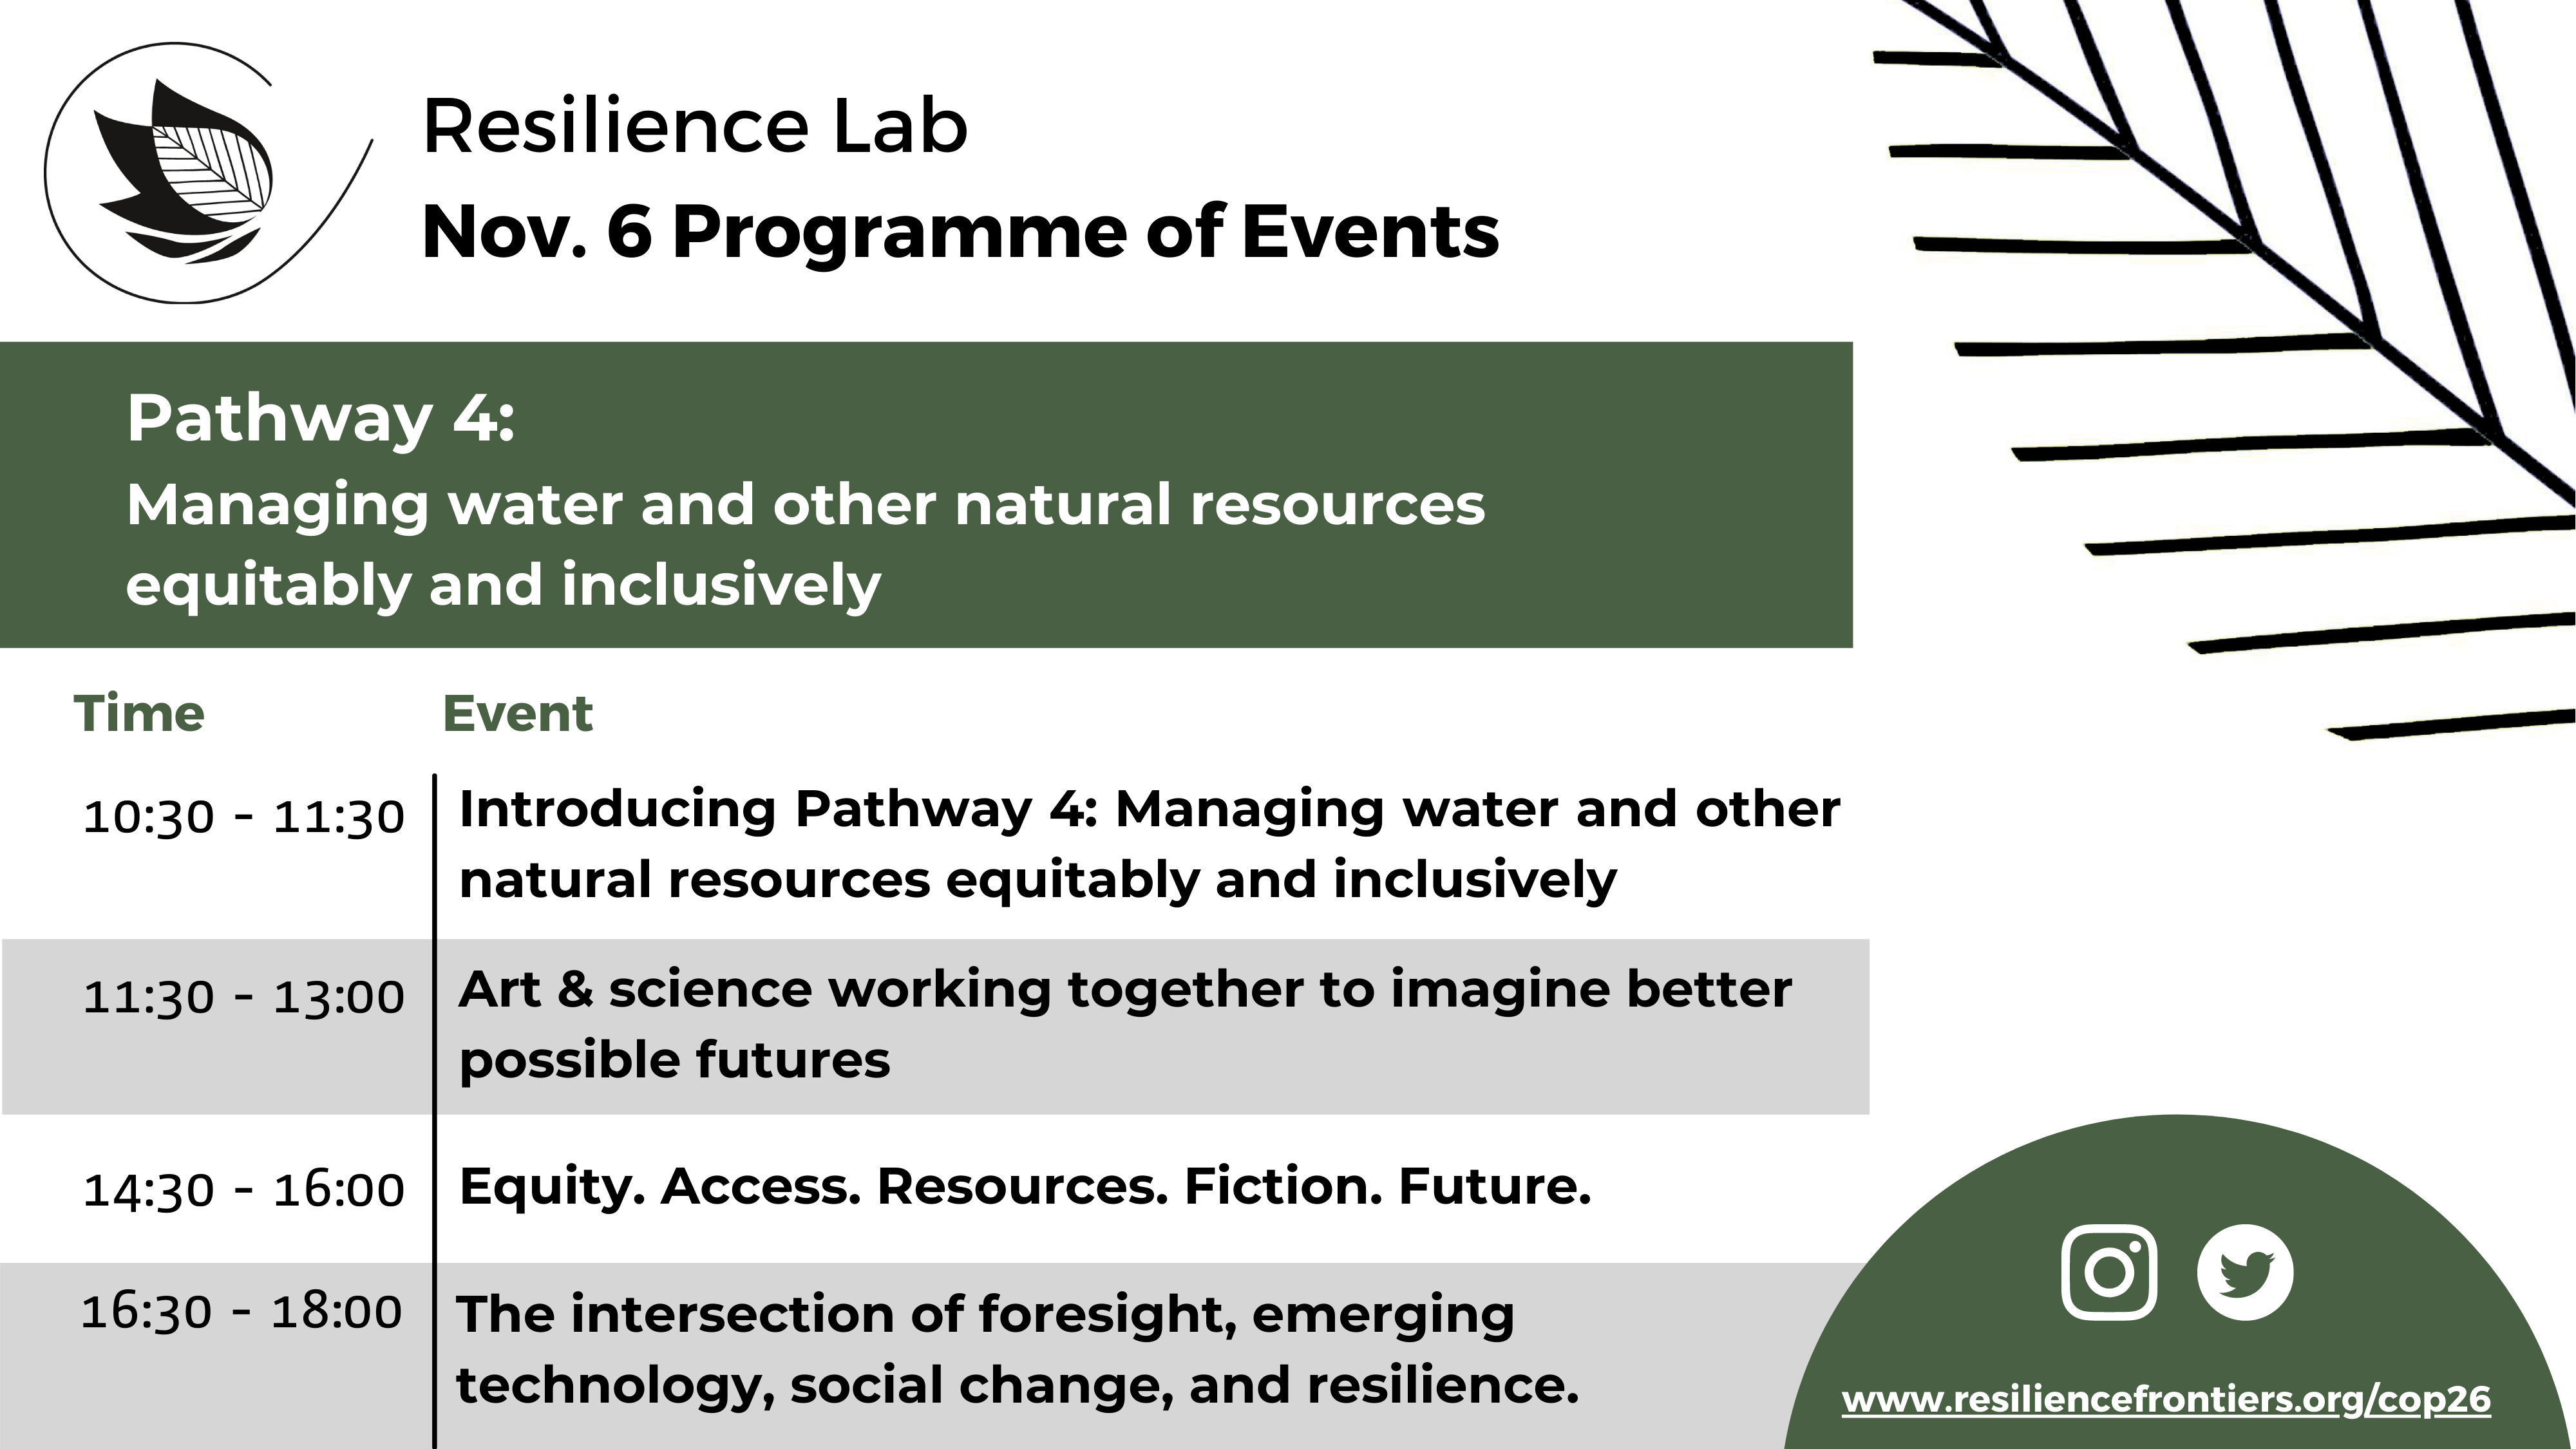 Resilience Lab Day 5 Programme of Events